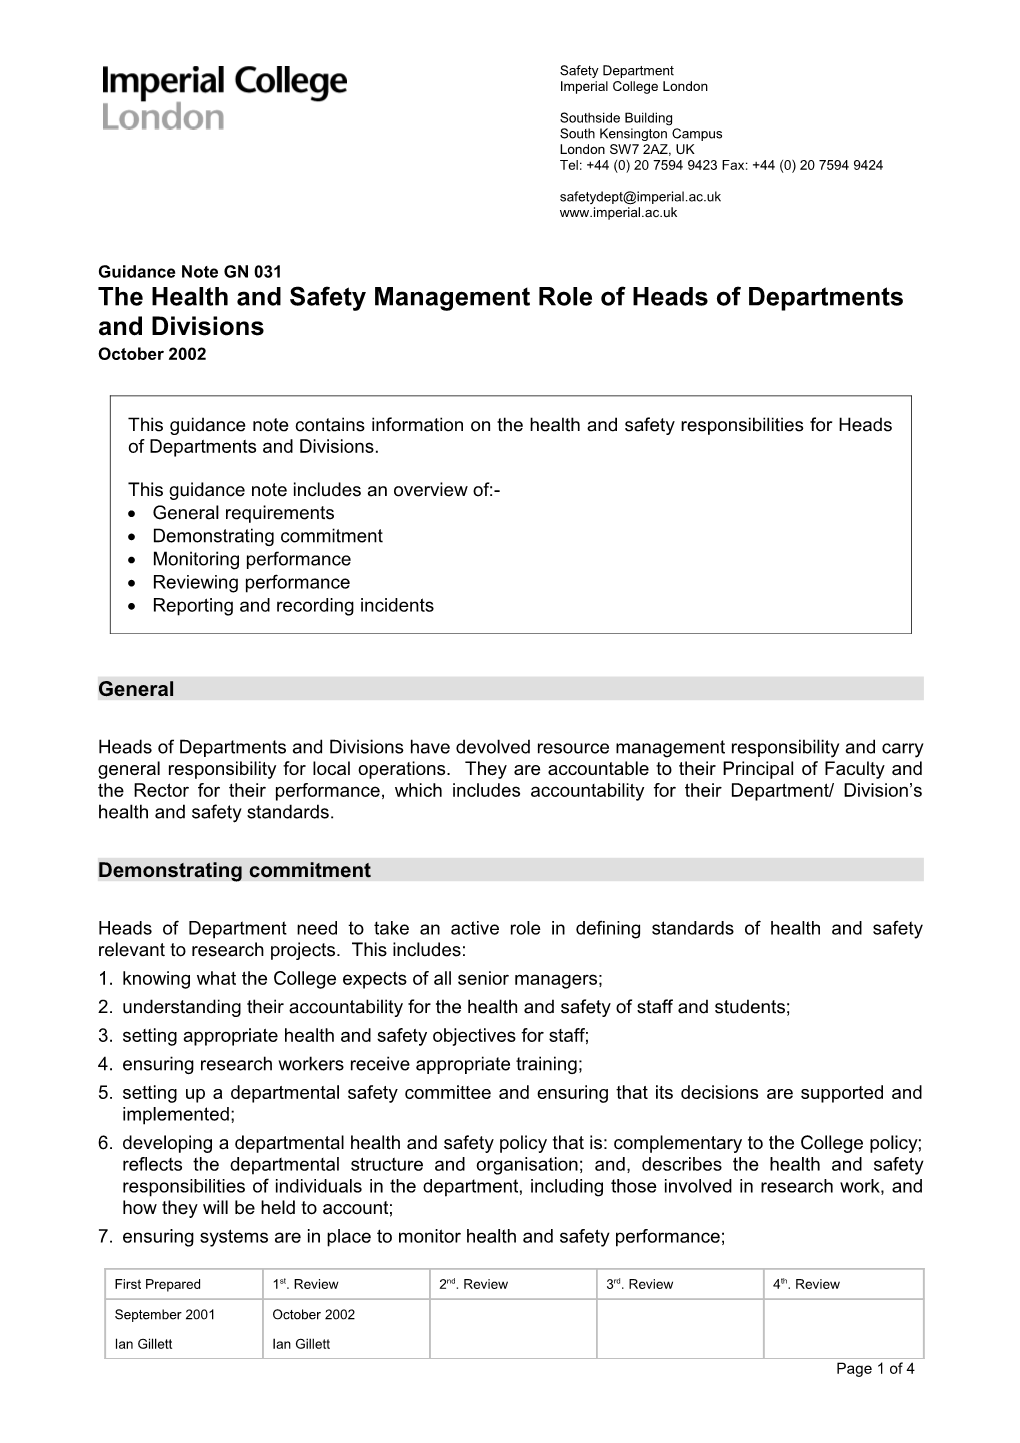 The Health and Safety Management Role of Heads of Departments and Divisions